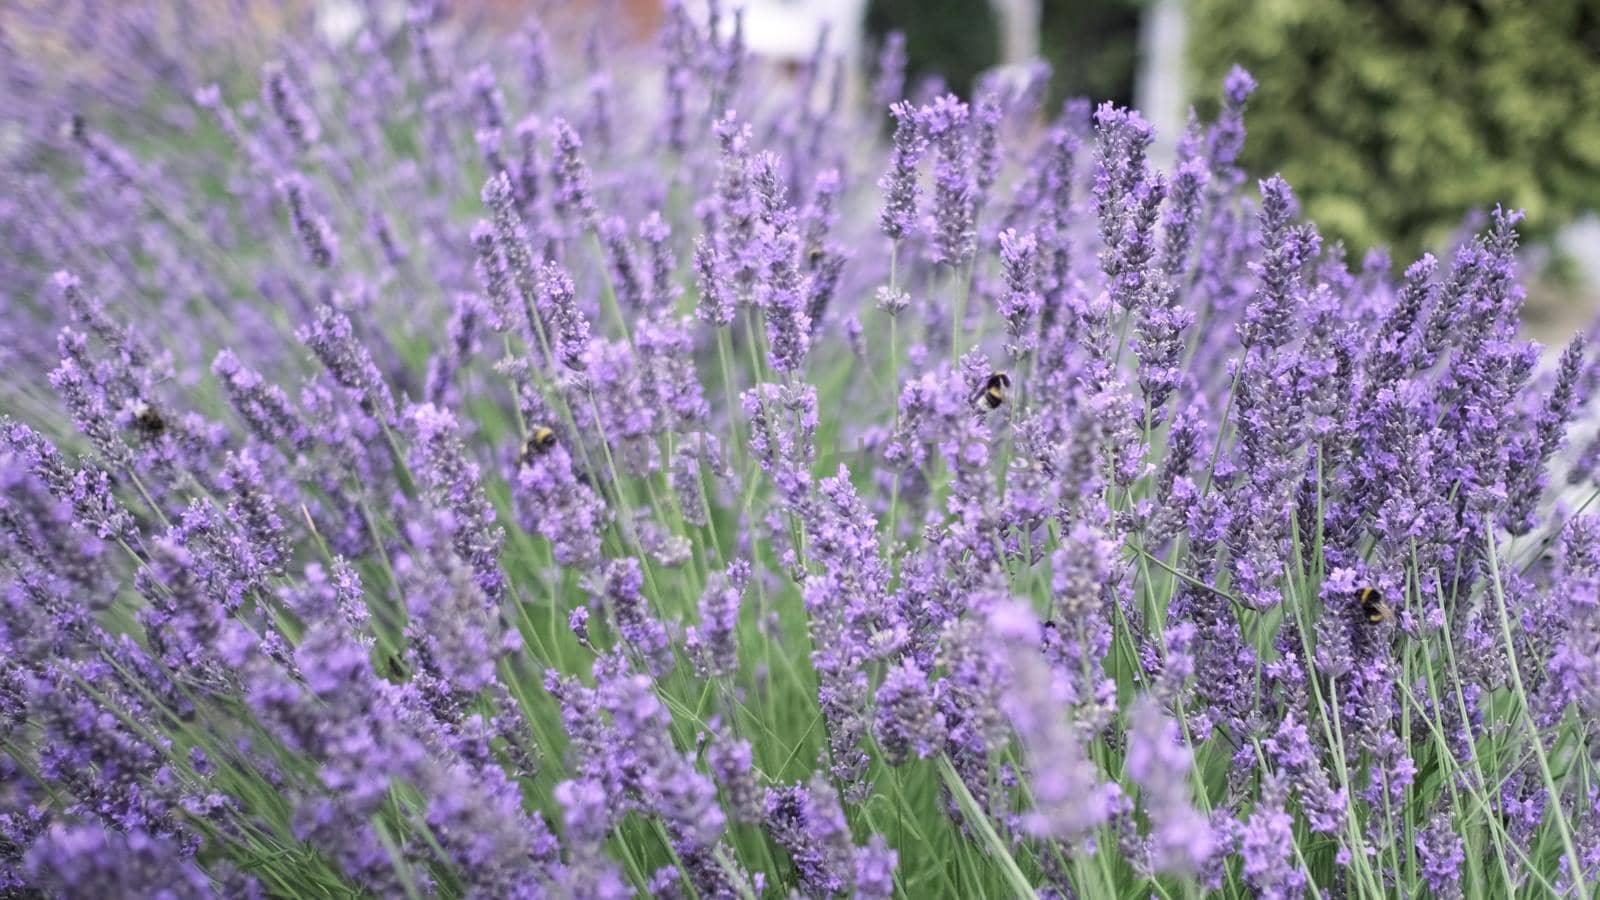 Flying bumble-bee gathering pollen from lavender blossoms. Close up Slow Motion. Beautiful Blooming Lavender Flowers swaying in wind. Provence, South France, Europe. Calm Cinematic Nature Background.